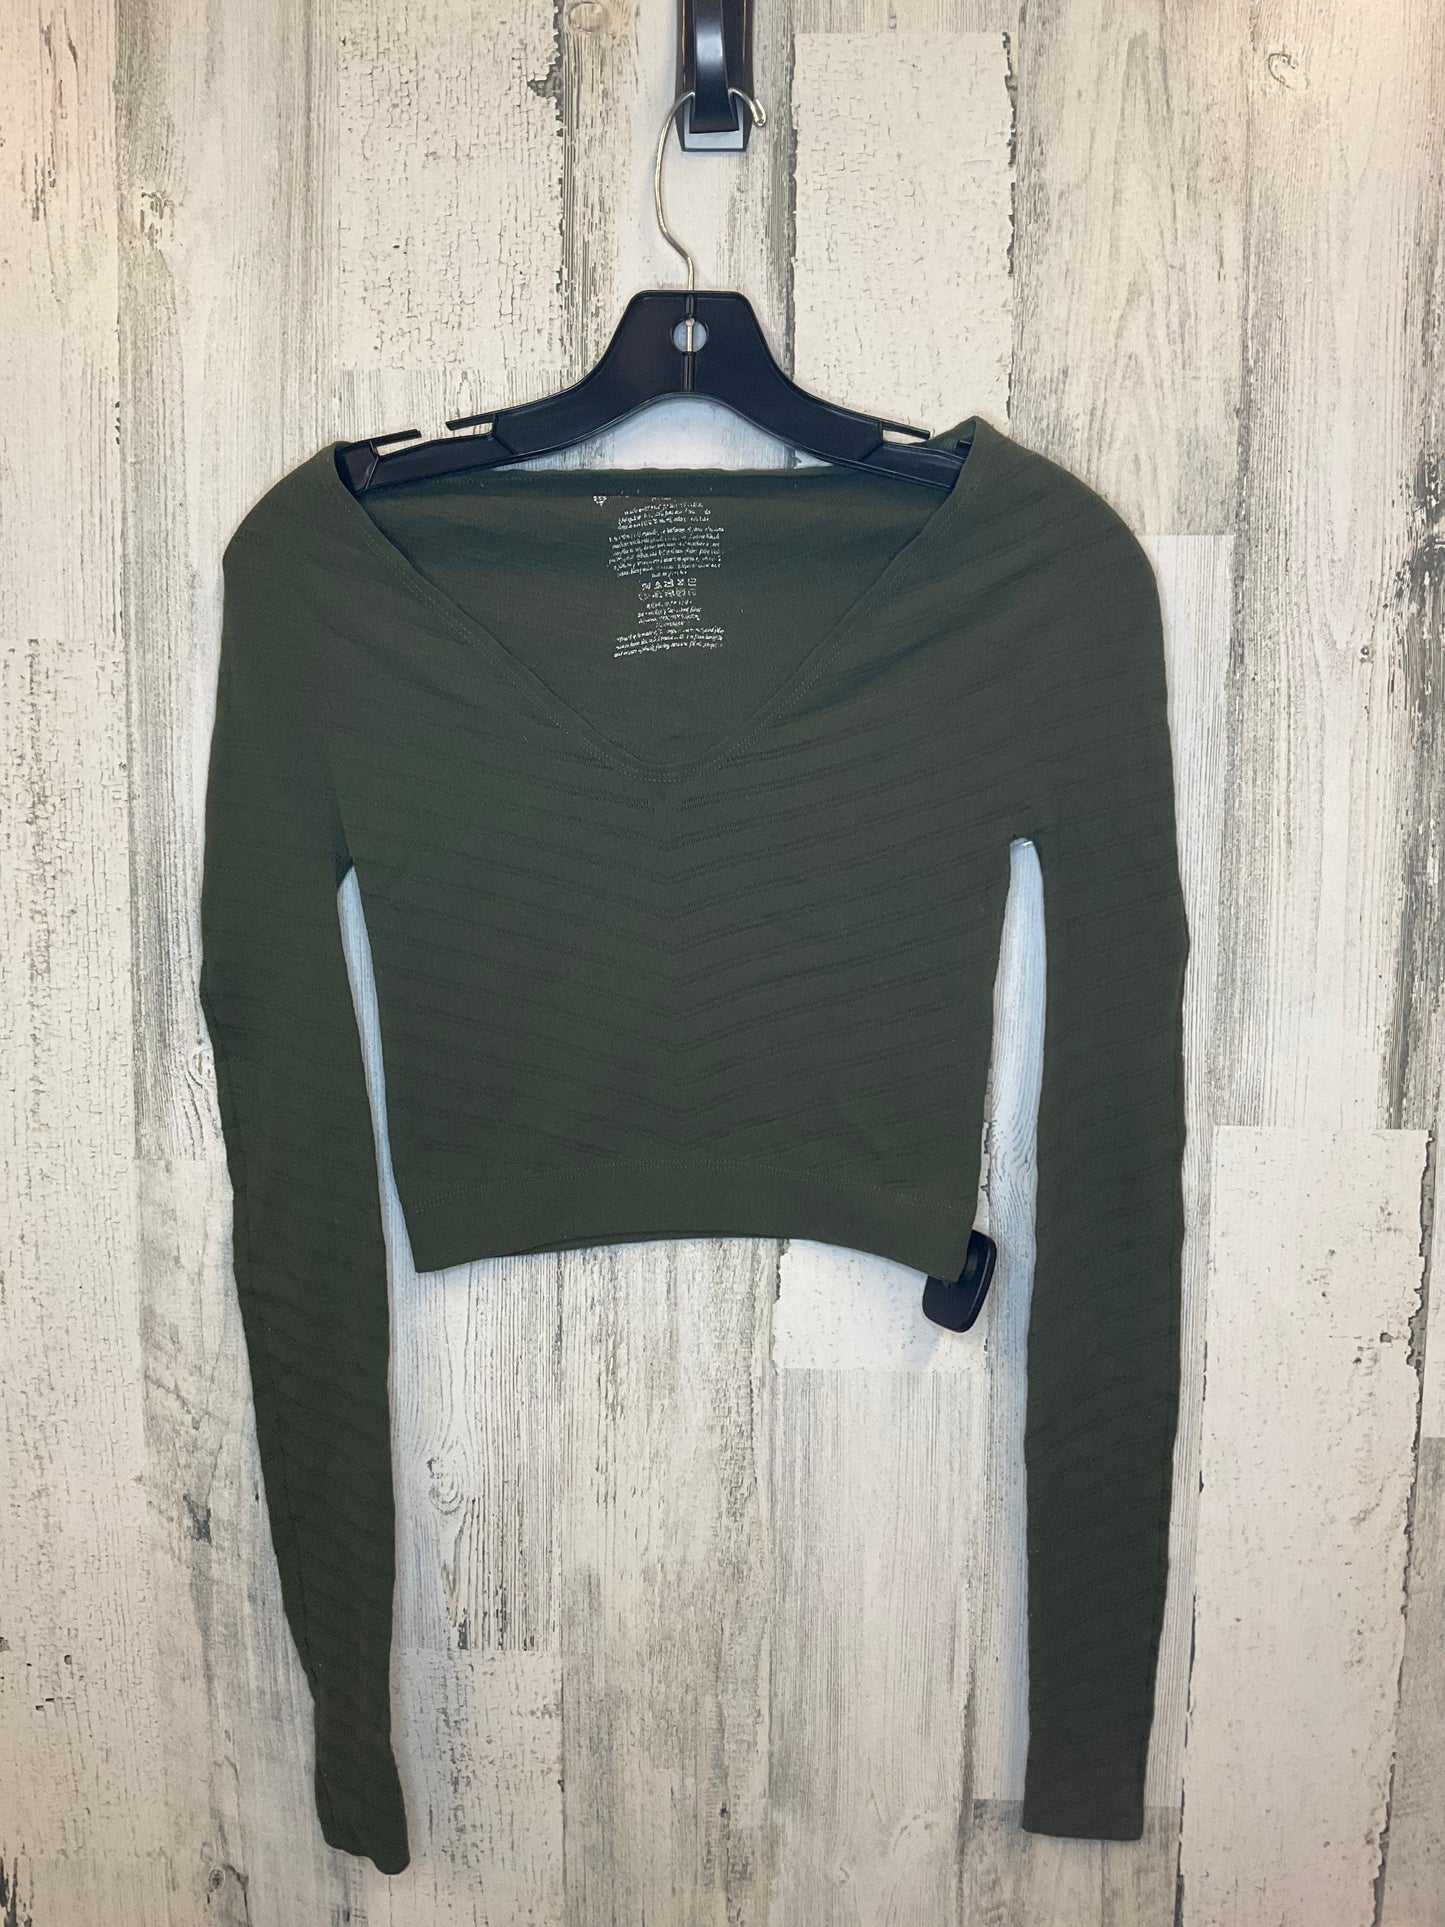 Athletic Top Long Sleeve Crewneck By Free People  Size: M